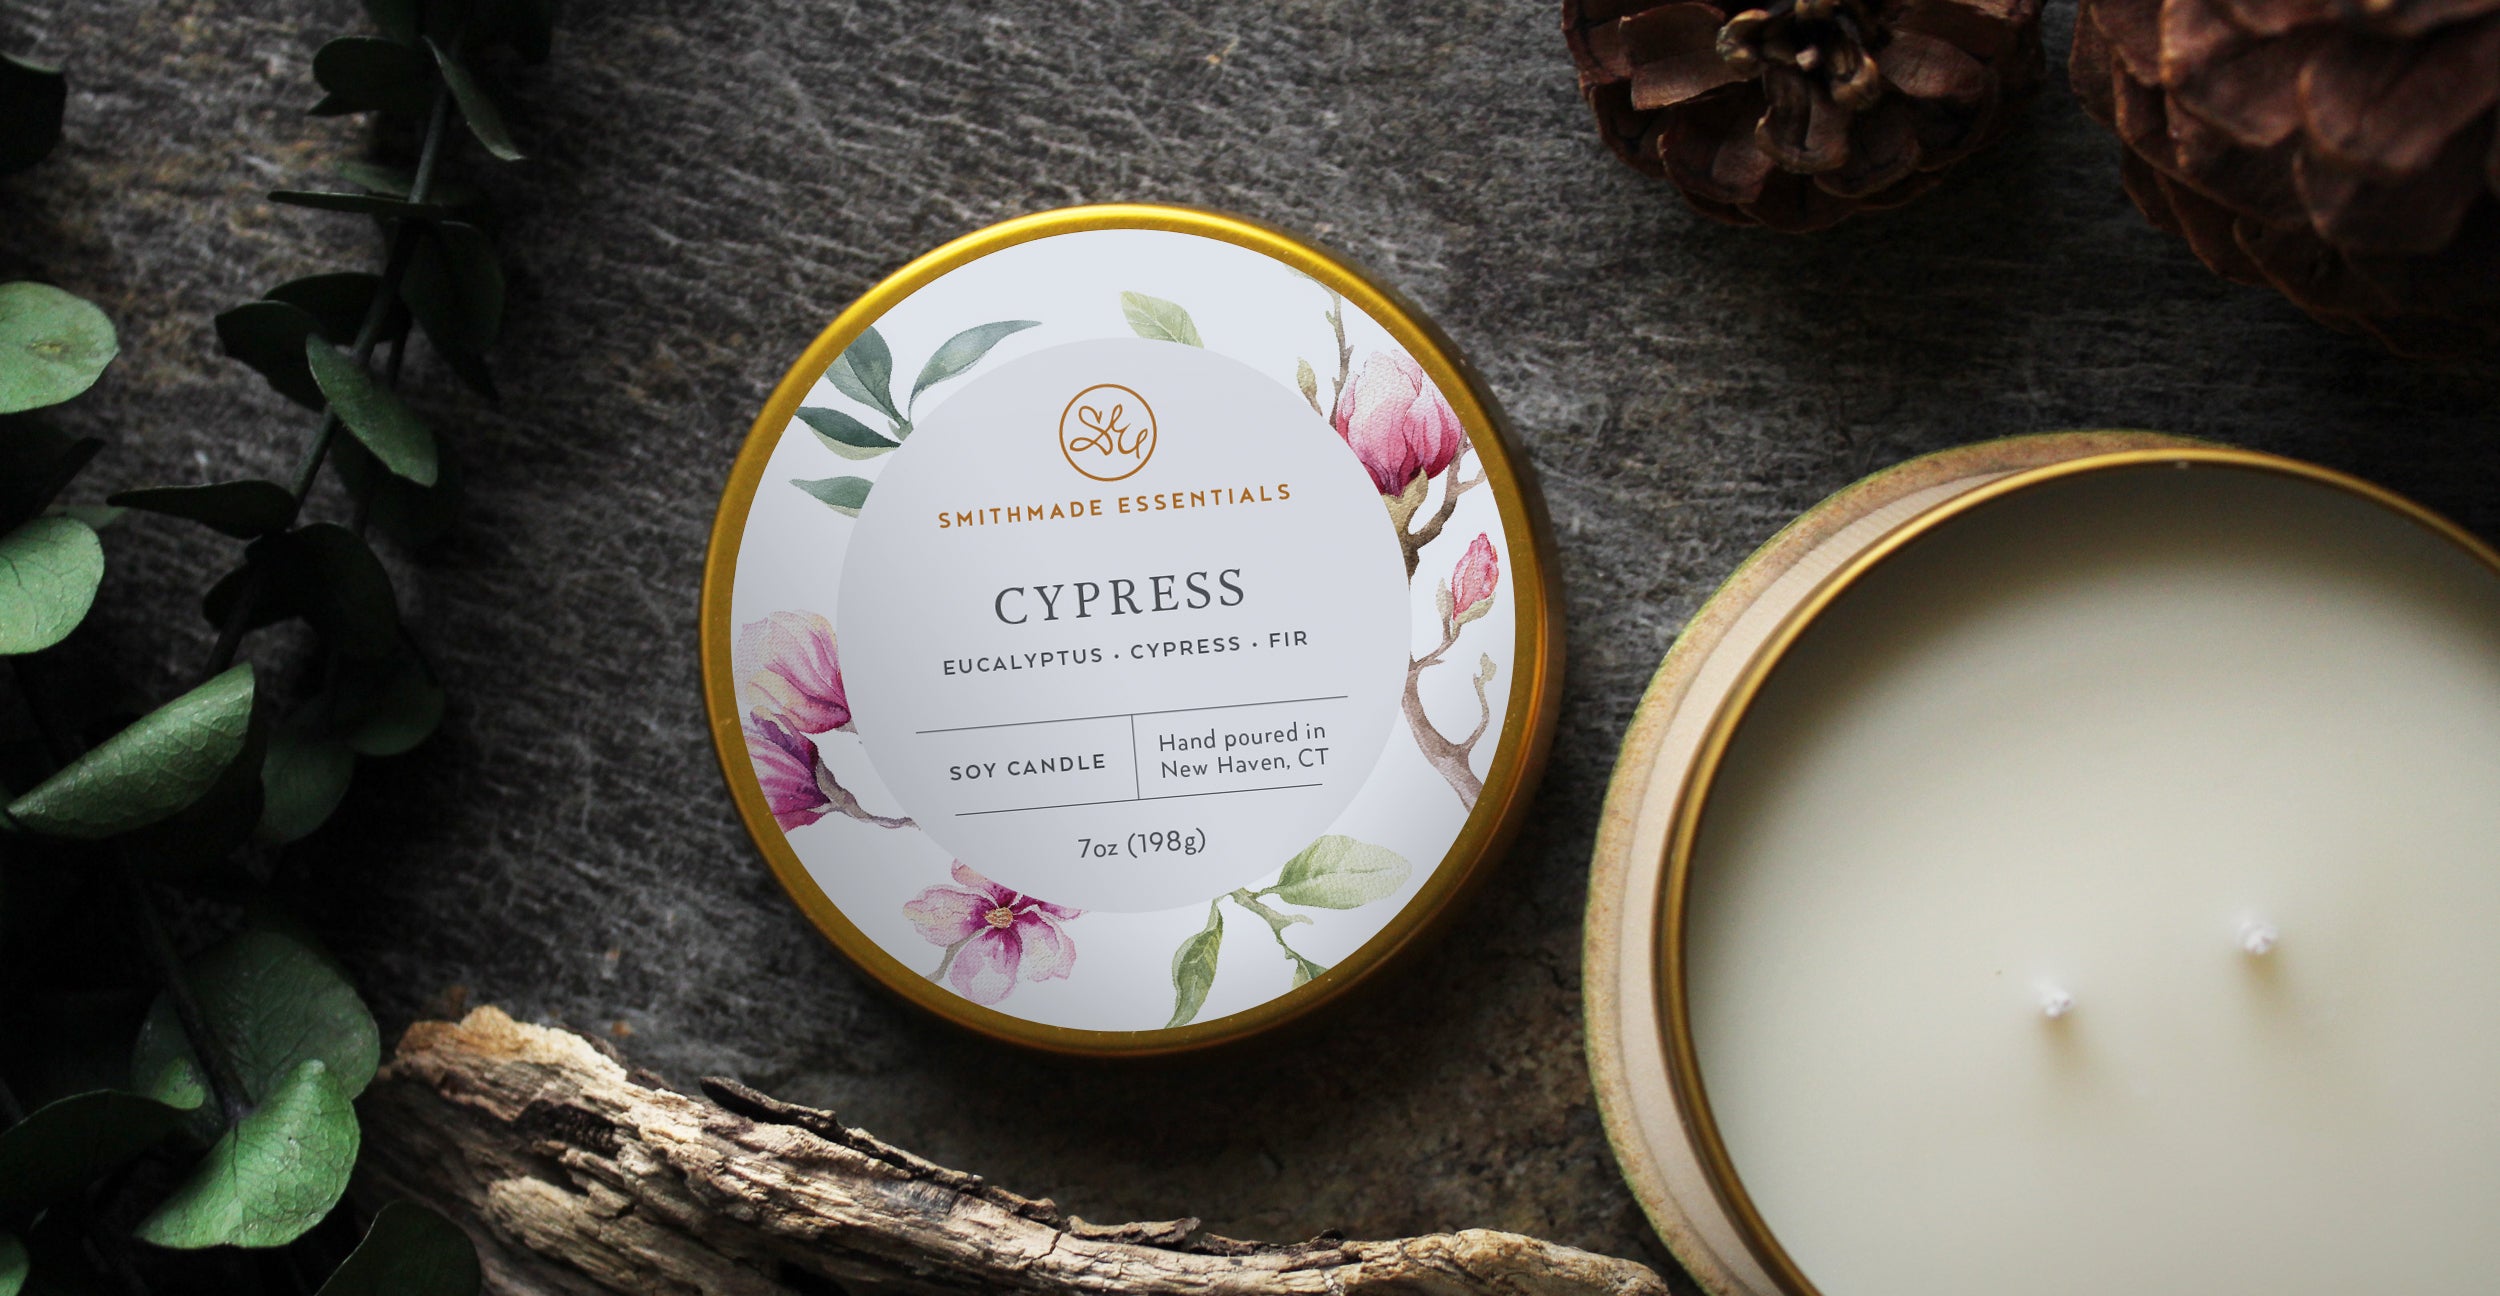 Cypress soy candle